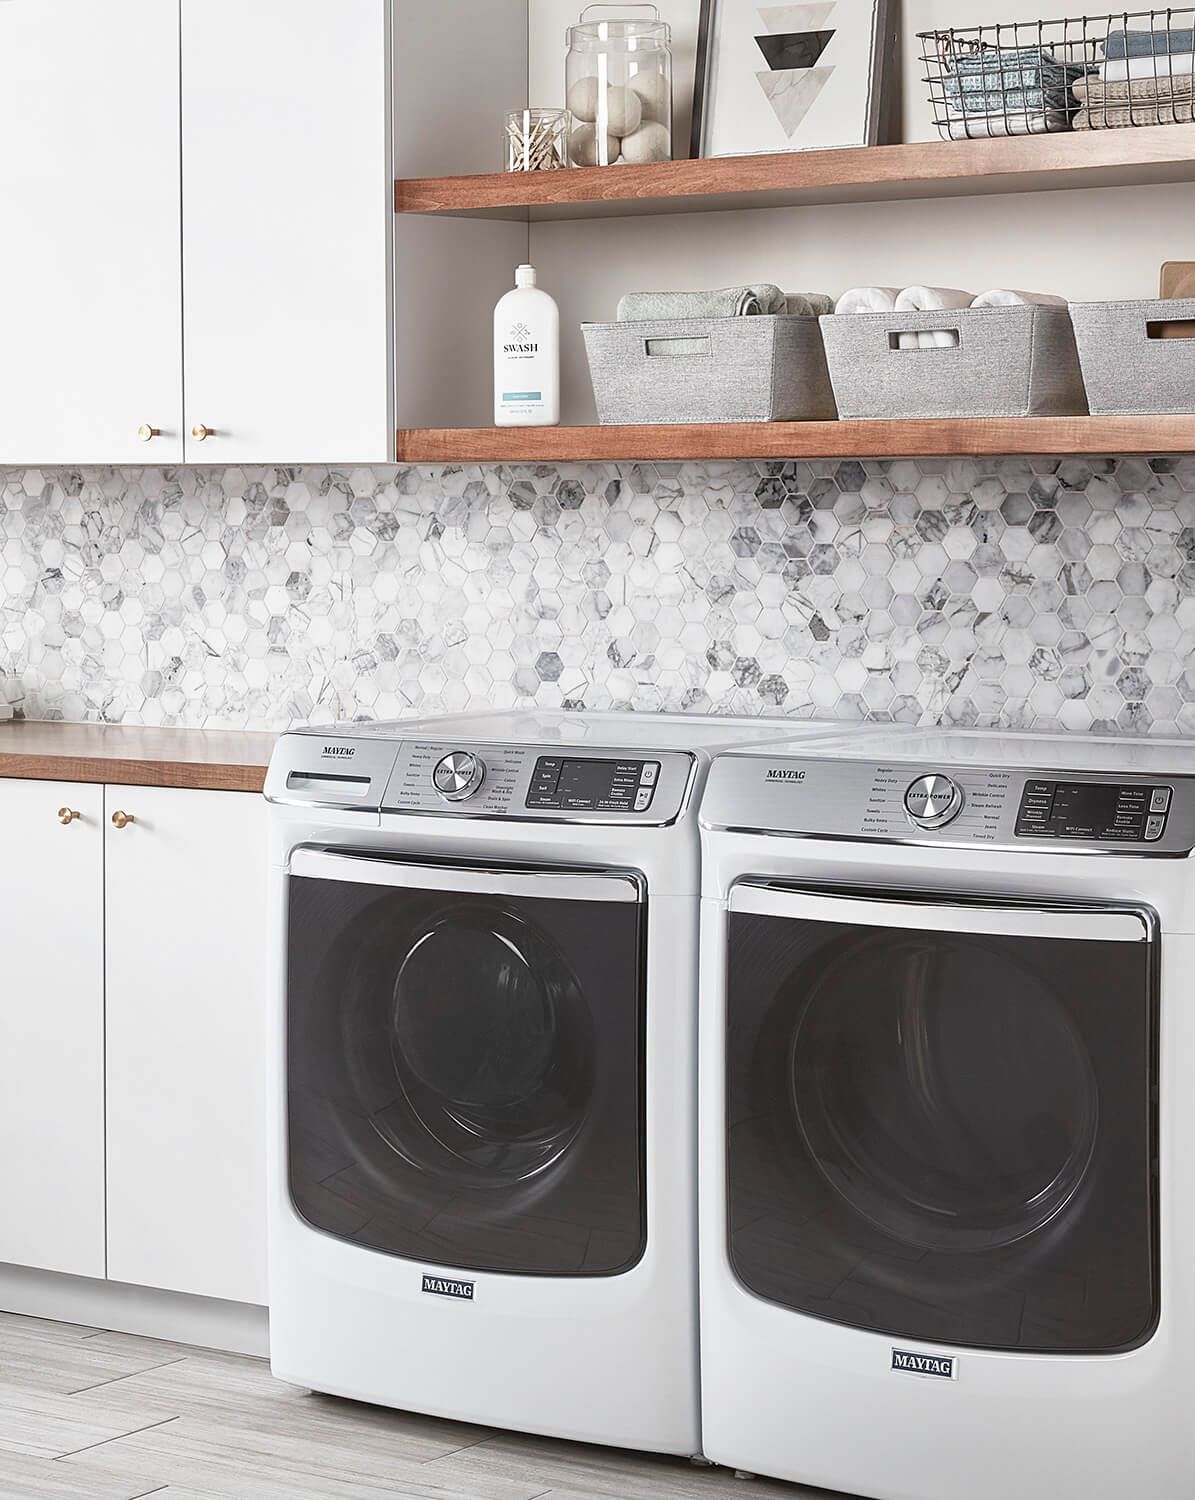 A light and airy laundry room with front loading machines and open shelving